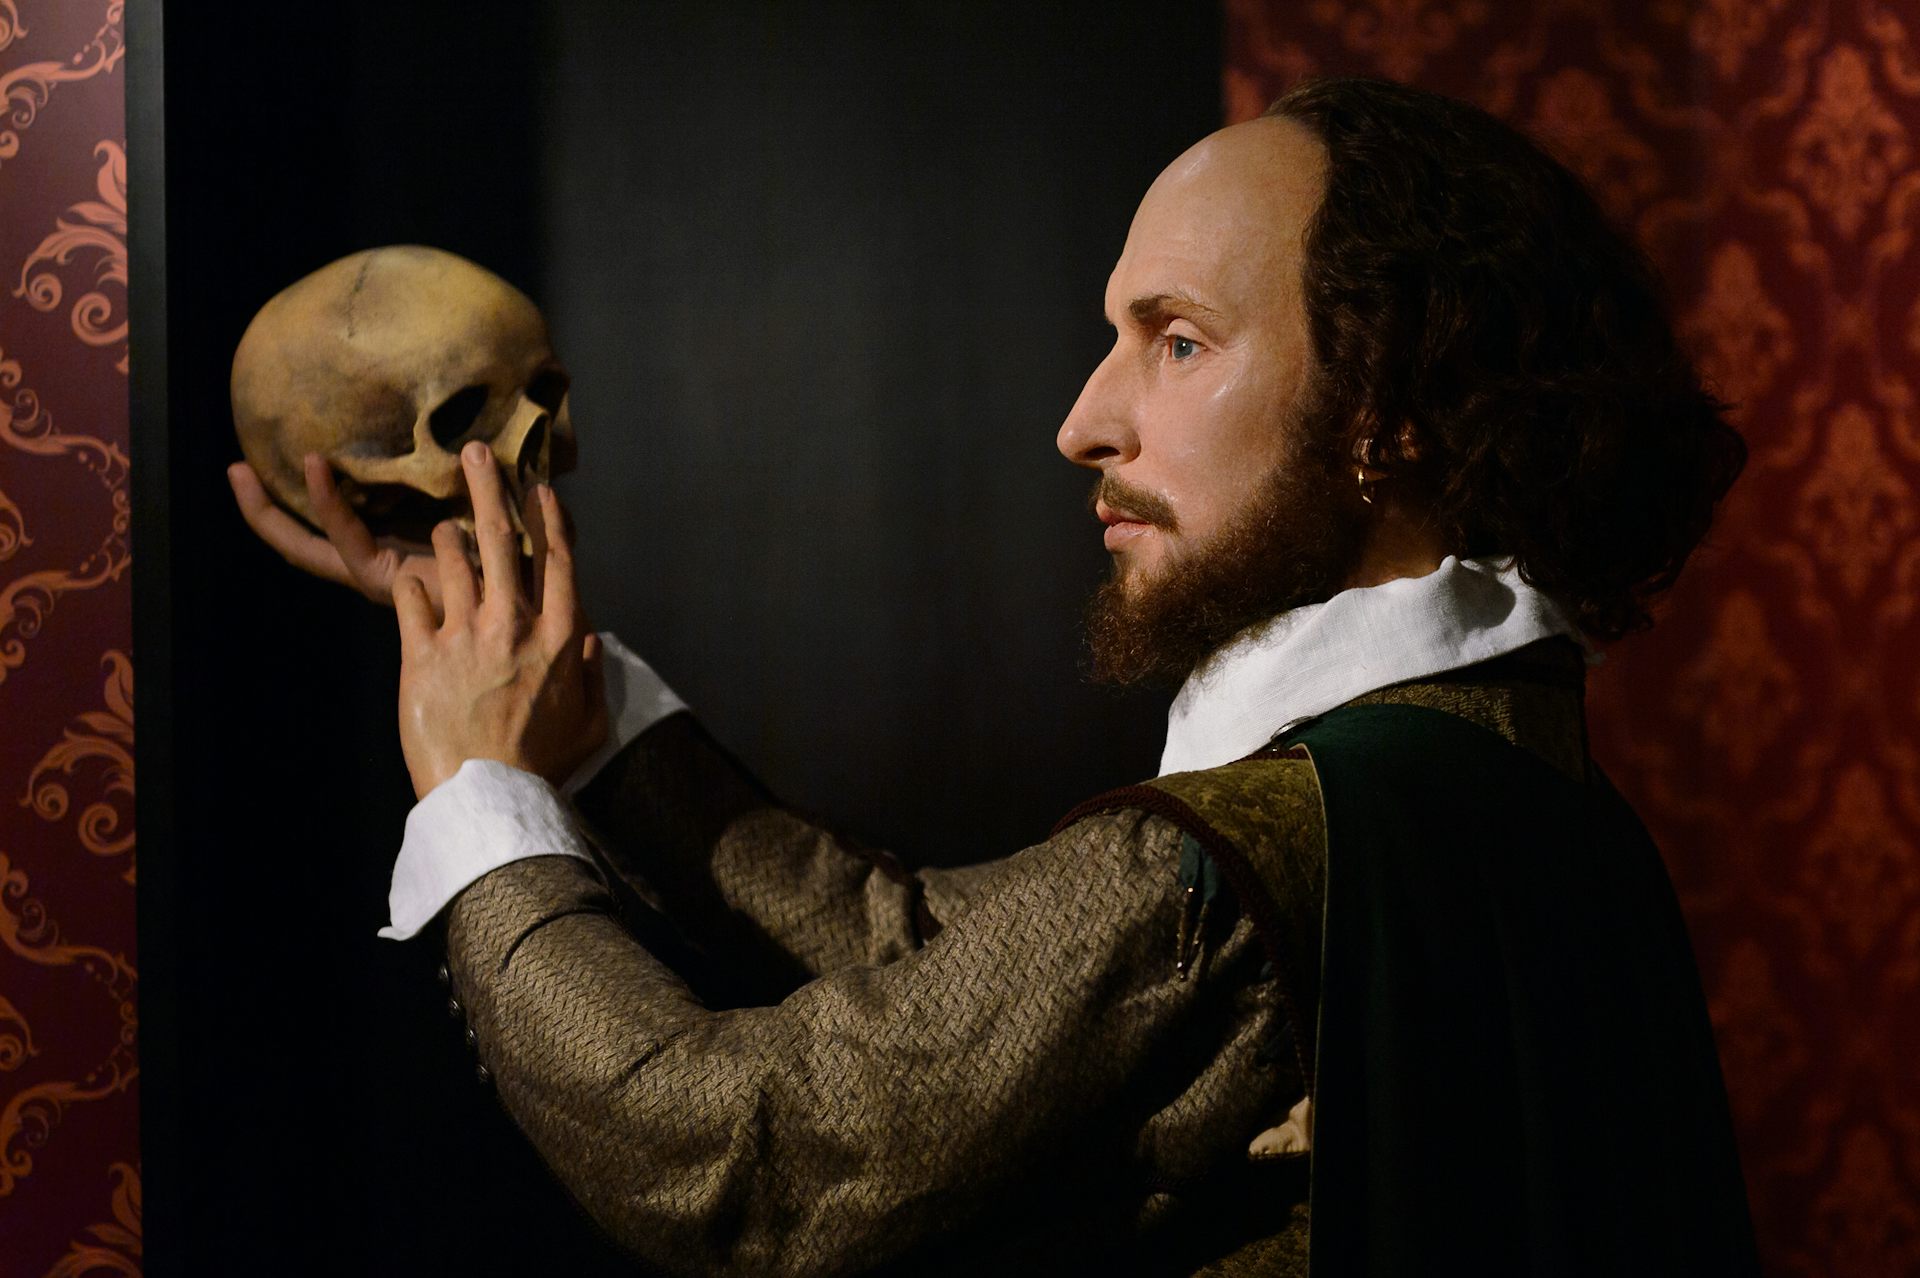 shakespeare in love themes